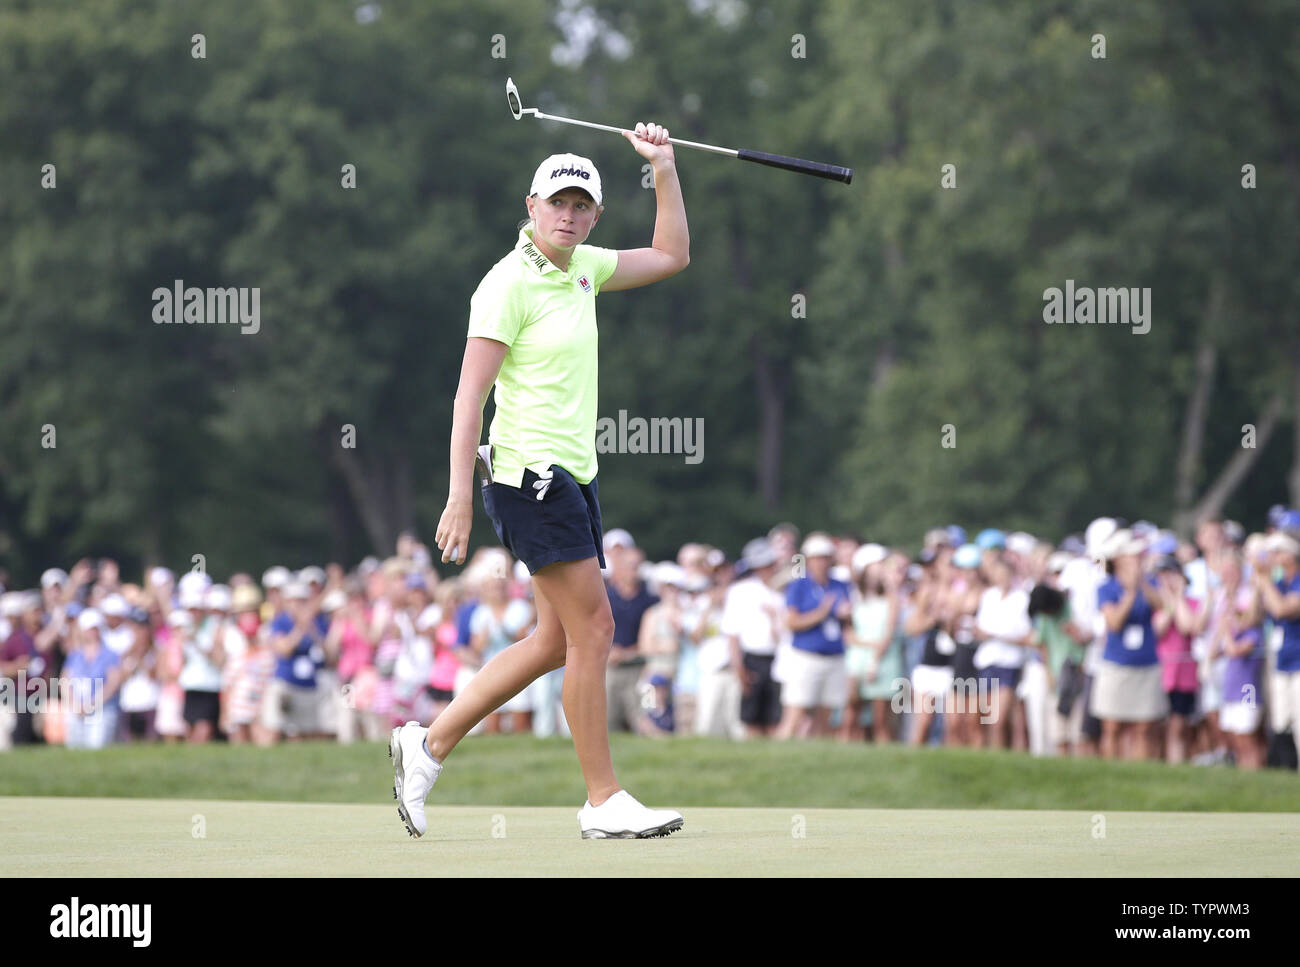 Stacy Lewis reacts to the applause on the 18th green in the final round of the LPGA U.S. Women's Open Championship at Lancaster Country Club in Lancaster, PA on July 12, 2015. In Gee Chun of Korea wins the U.S. Women's Open and her first LPGA major championship with a score of 8 under par.     Photo by John Angelillo/UPI Stock Photo